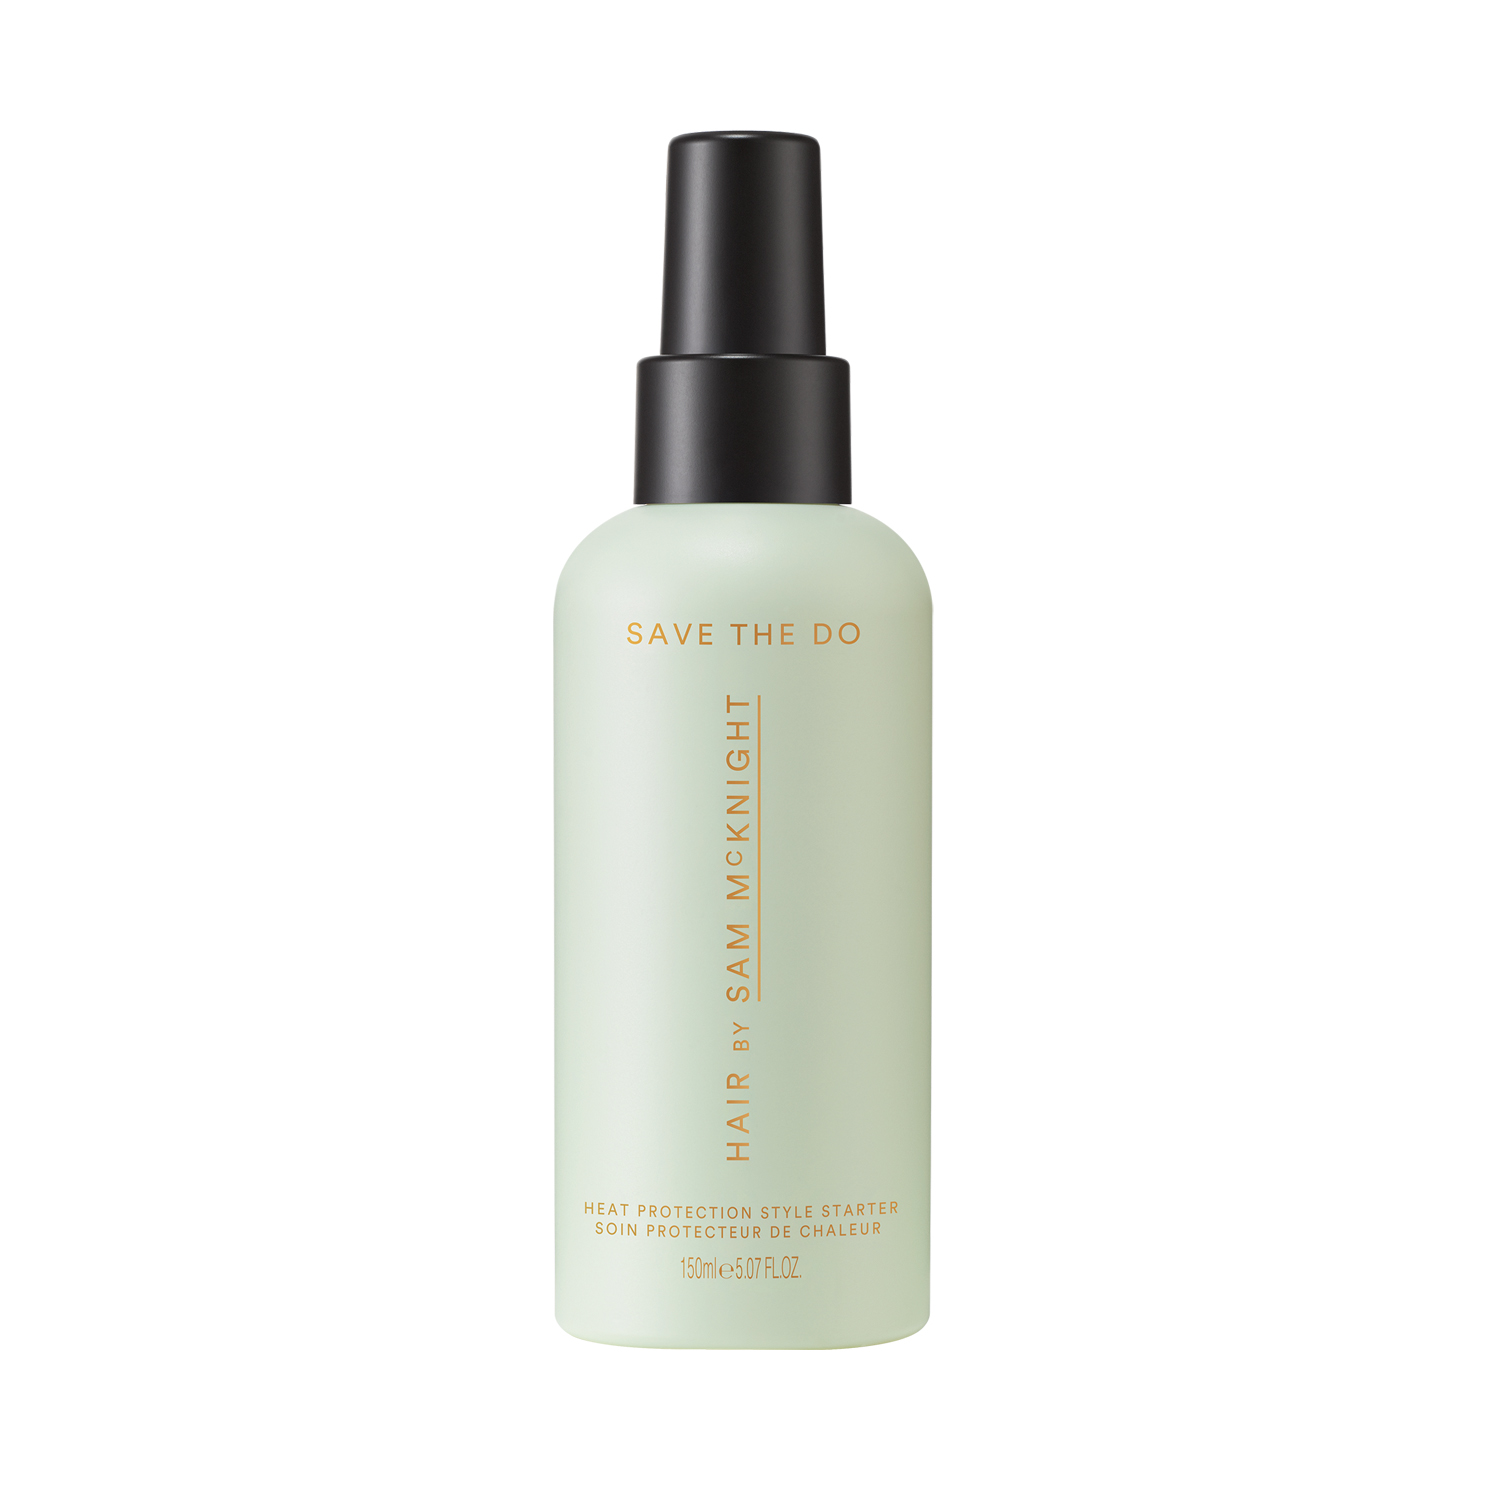 Hair by Sam McKnight Save the Do Heat Protection Style Starter | Space NK